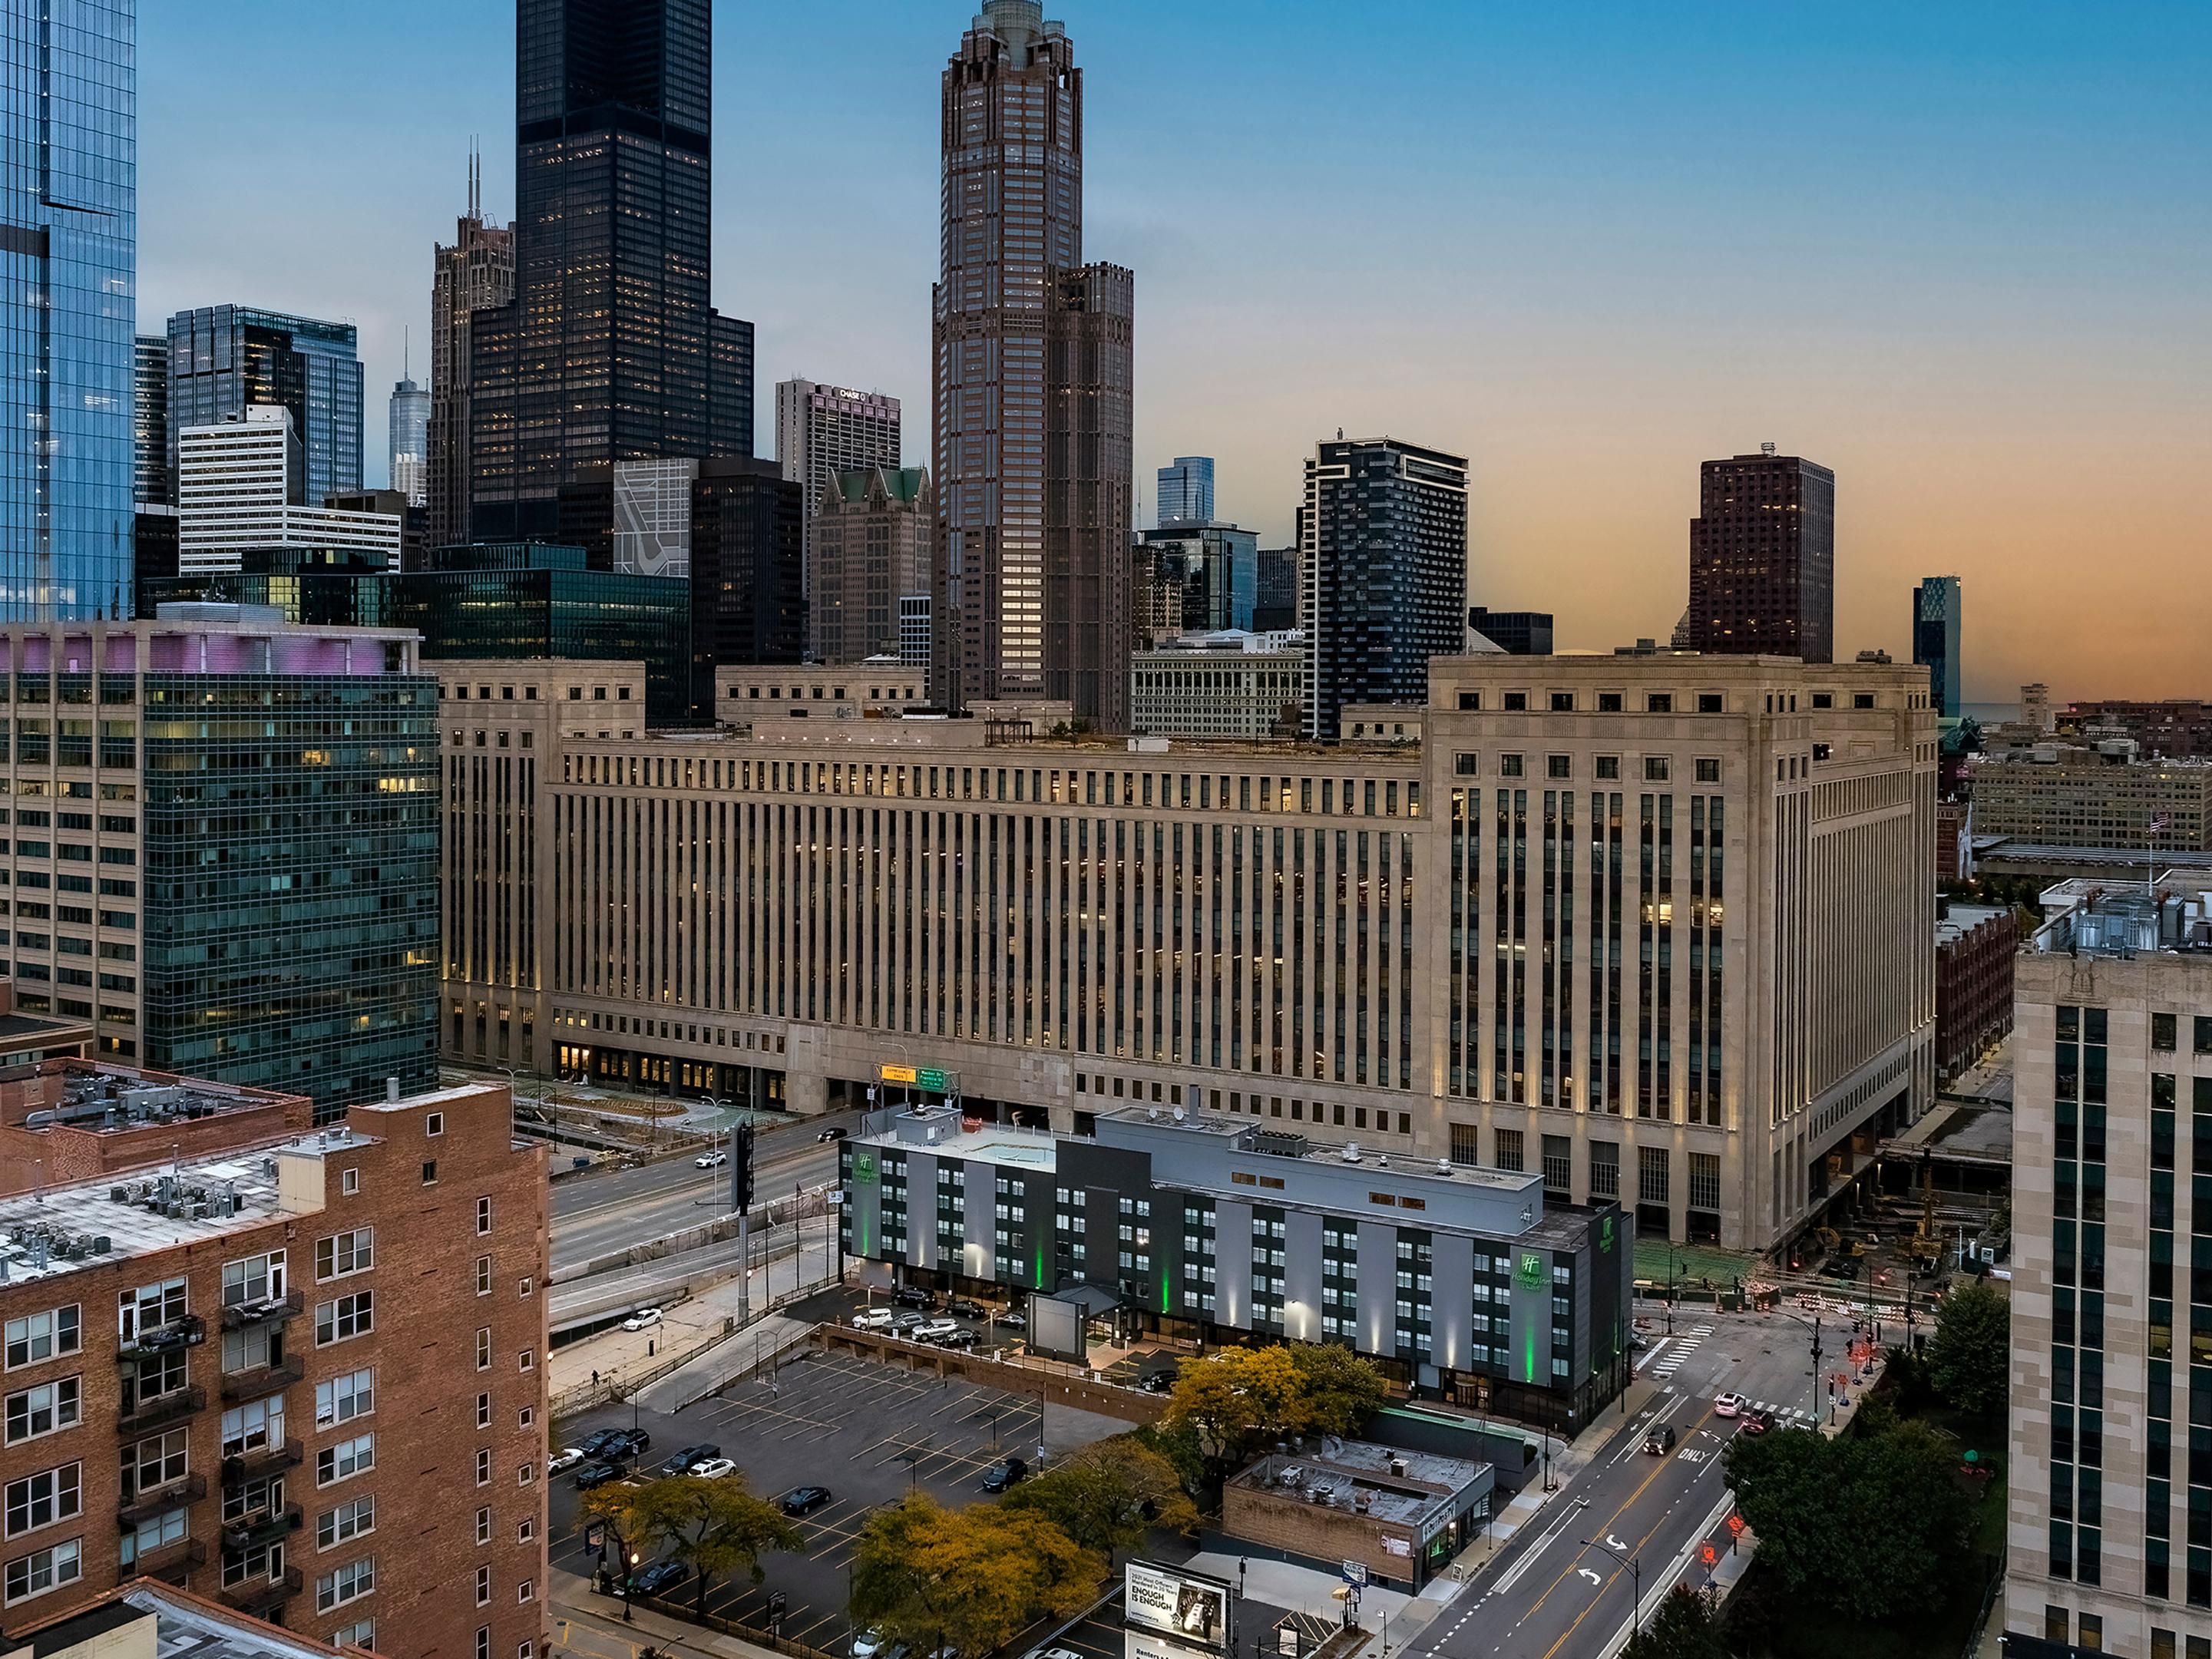 The Holiday Inn & Suites Chicago Downtown is located just steps away from the Historic Old Post Office Chicago. The Old Post Office tenants will include: Walgreens, the Chicago Board  Options Exchange, Ferrara Candy, Uber, Kroger and more. Make your reservations today, no need to take a taxi or Uber, walk across the street to your destination.